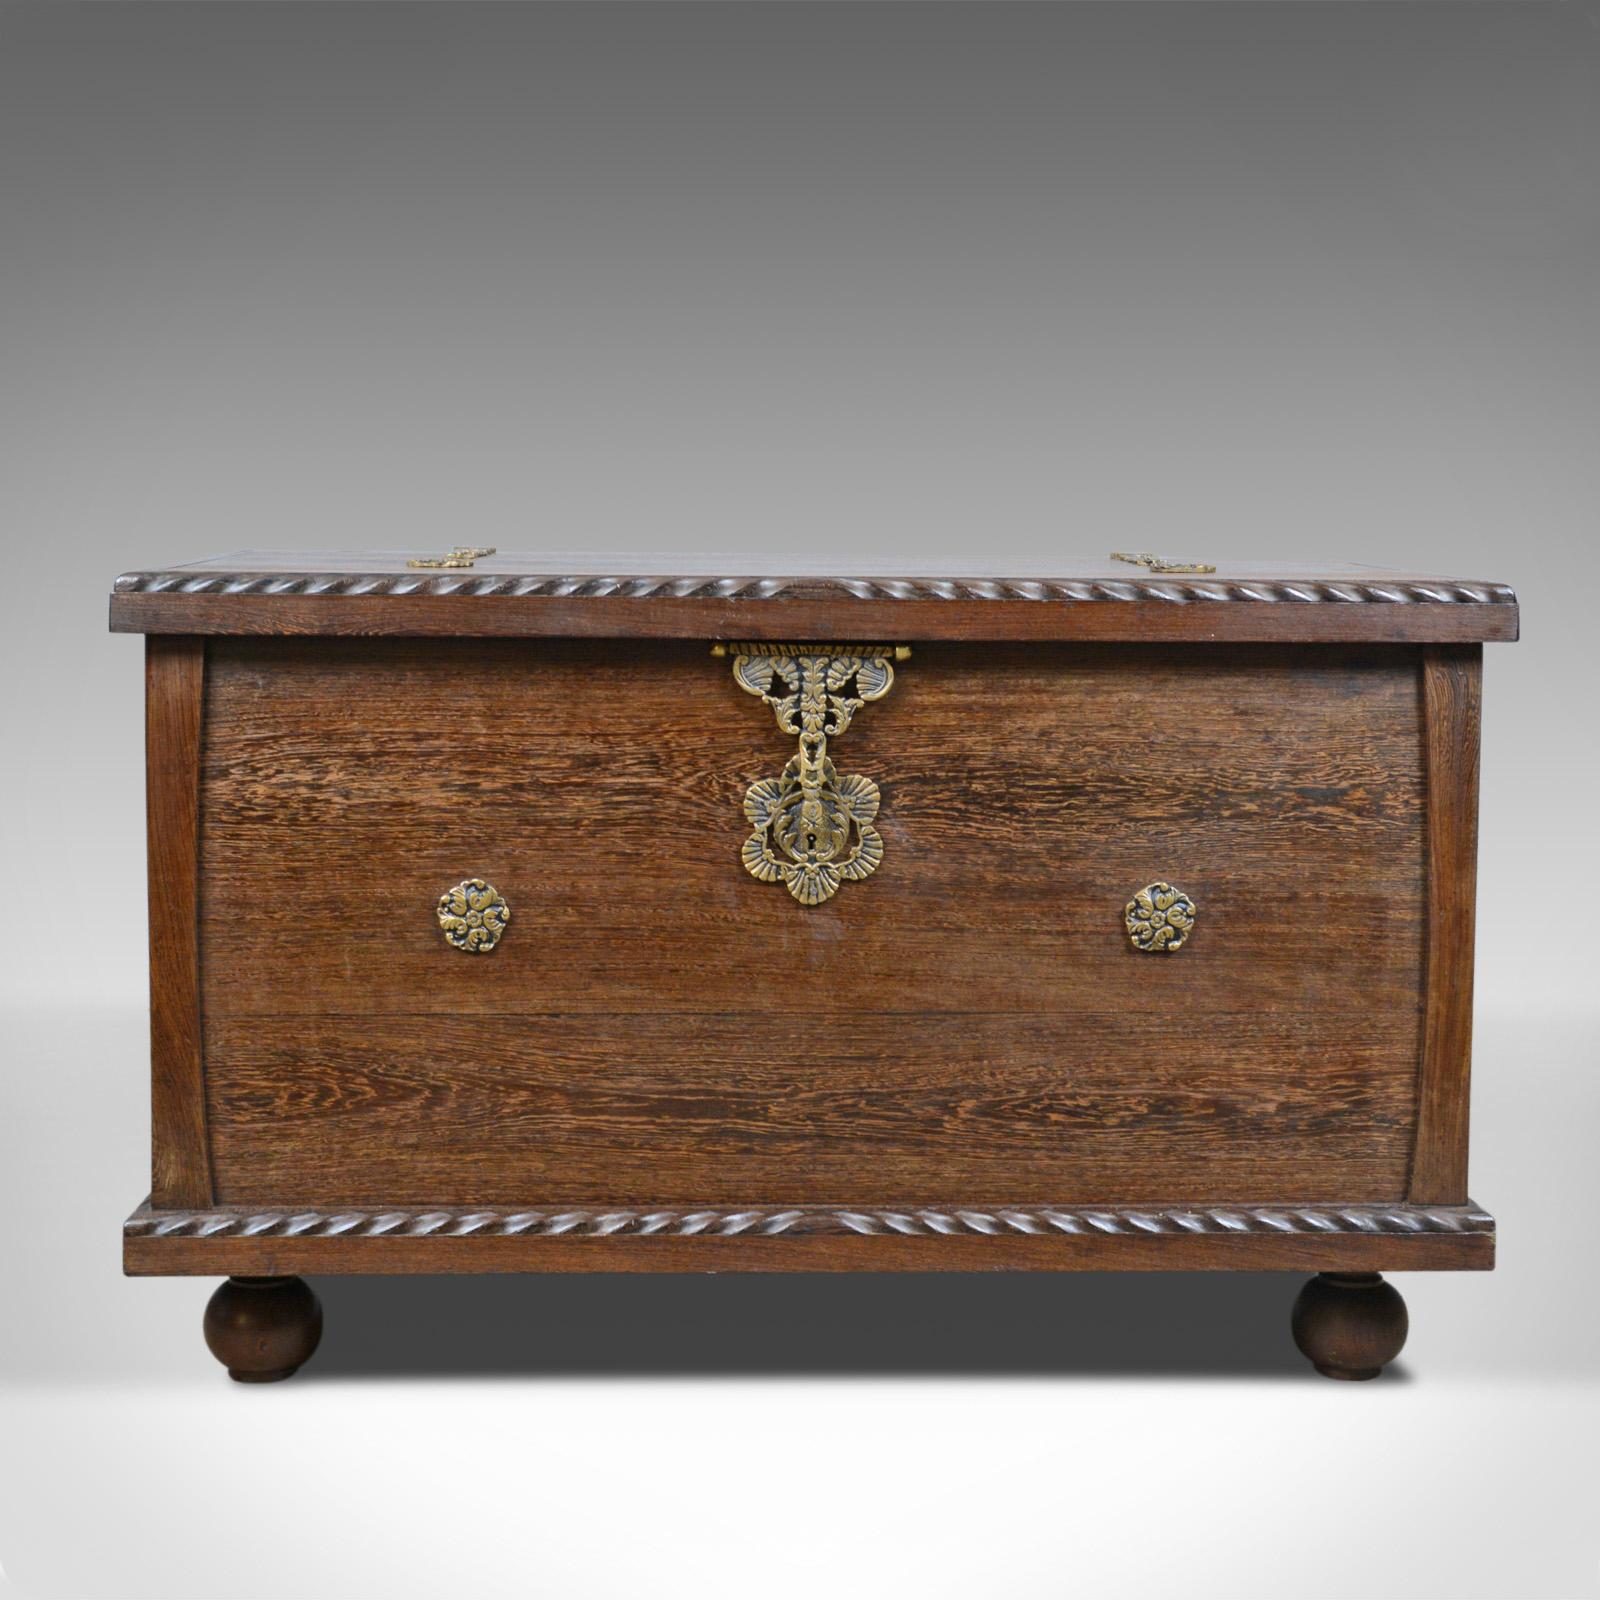 This is a mid-20th century Burmese chest. A hard wood teak trunk contemporary to the Art Deco period, circa 1940.

Of quality timber and craftsmanship
Attractive grain detail in a wax polished finish
Deep, rich tones and a desirable aged